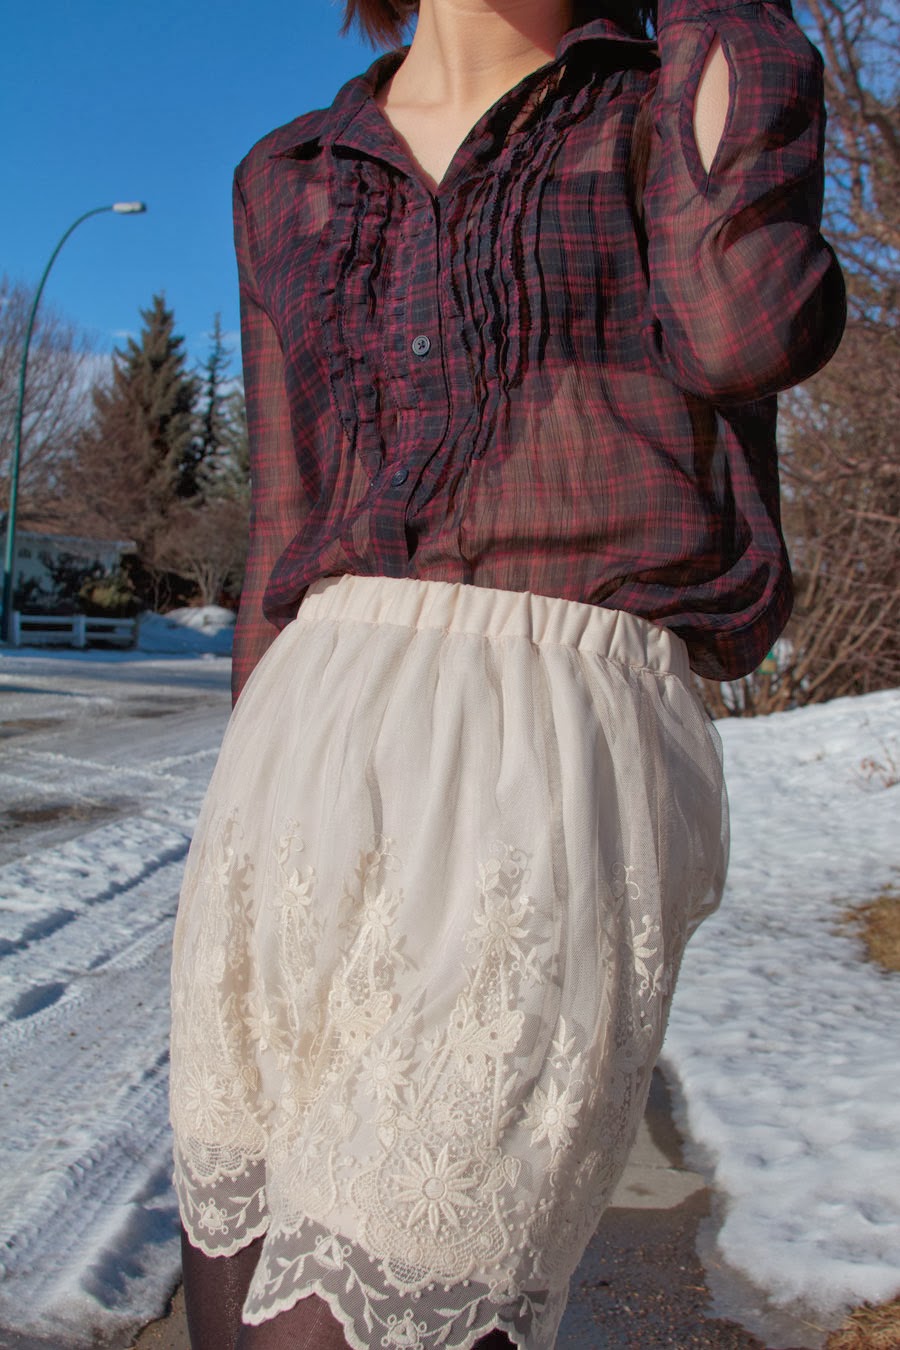 Lace up booties, sheer top, plaid, lace skirt, urban outfitters, spring fashion